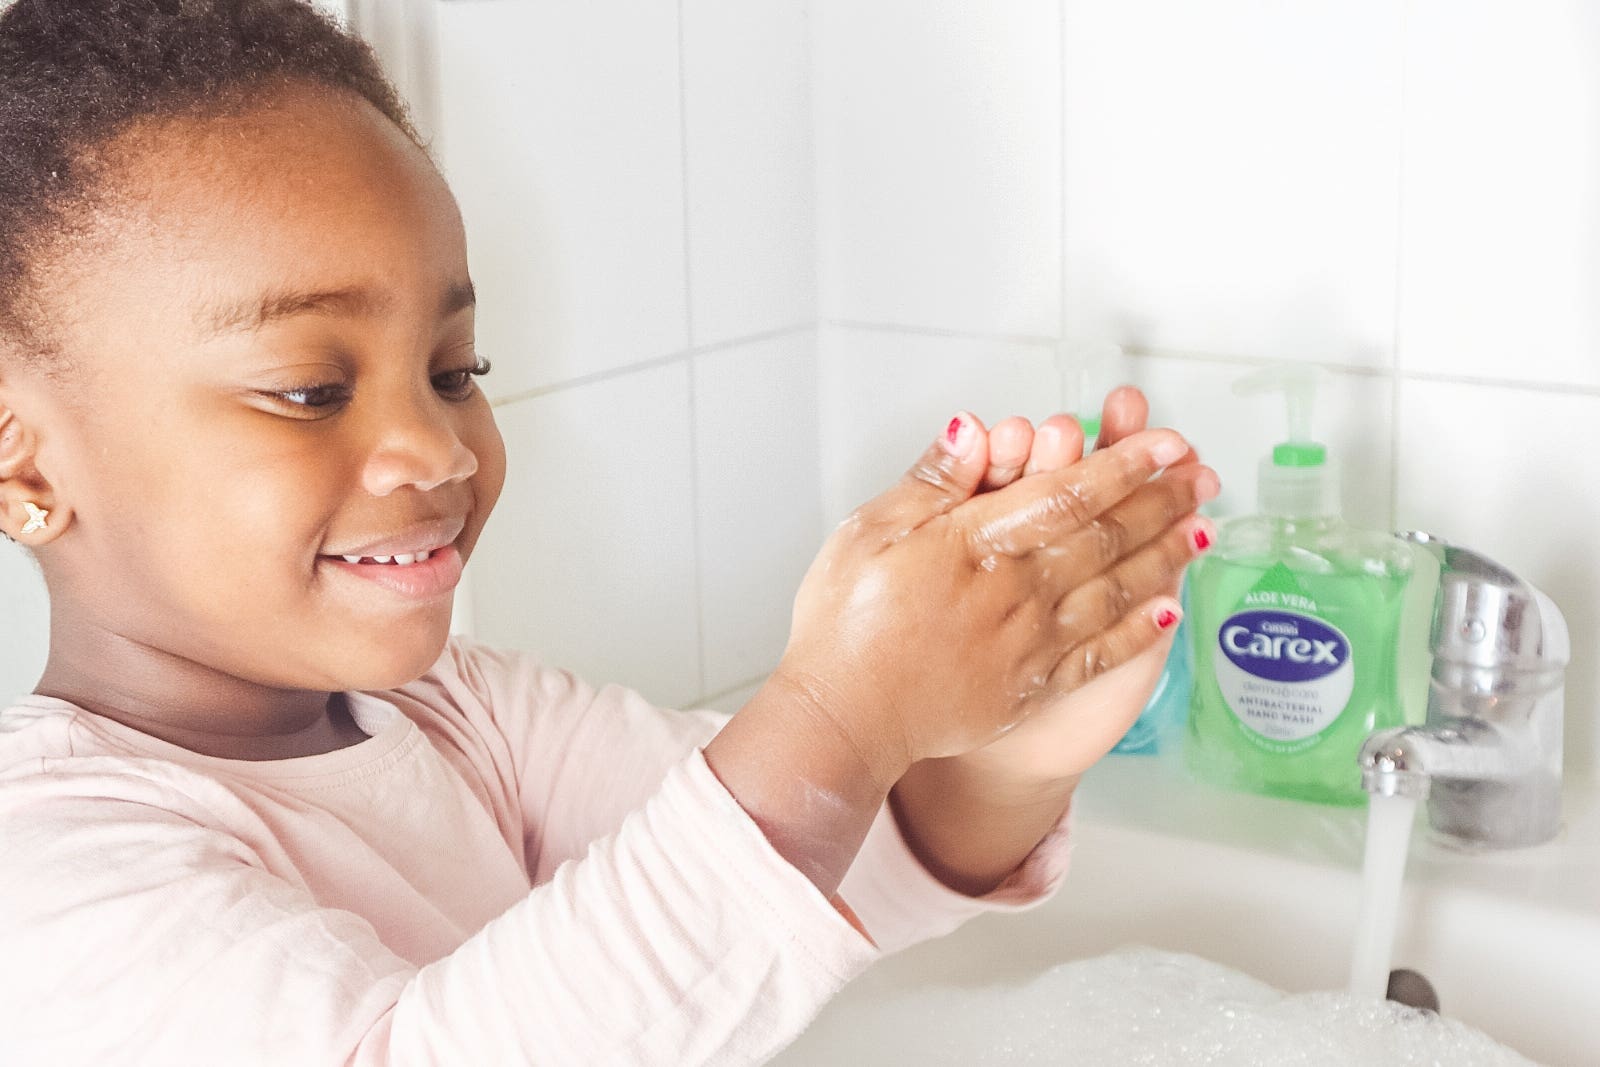 The maker of Carex soap and Imperial Leather warned its near-term financial performance would be impacted by the devaluation of the naira (PZ Cussons/PA)